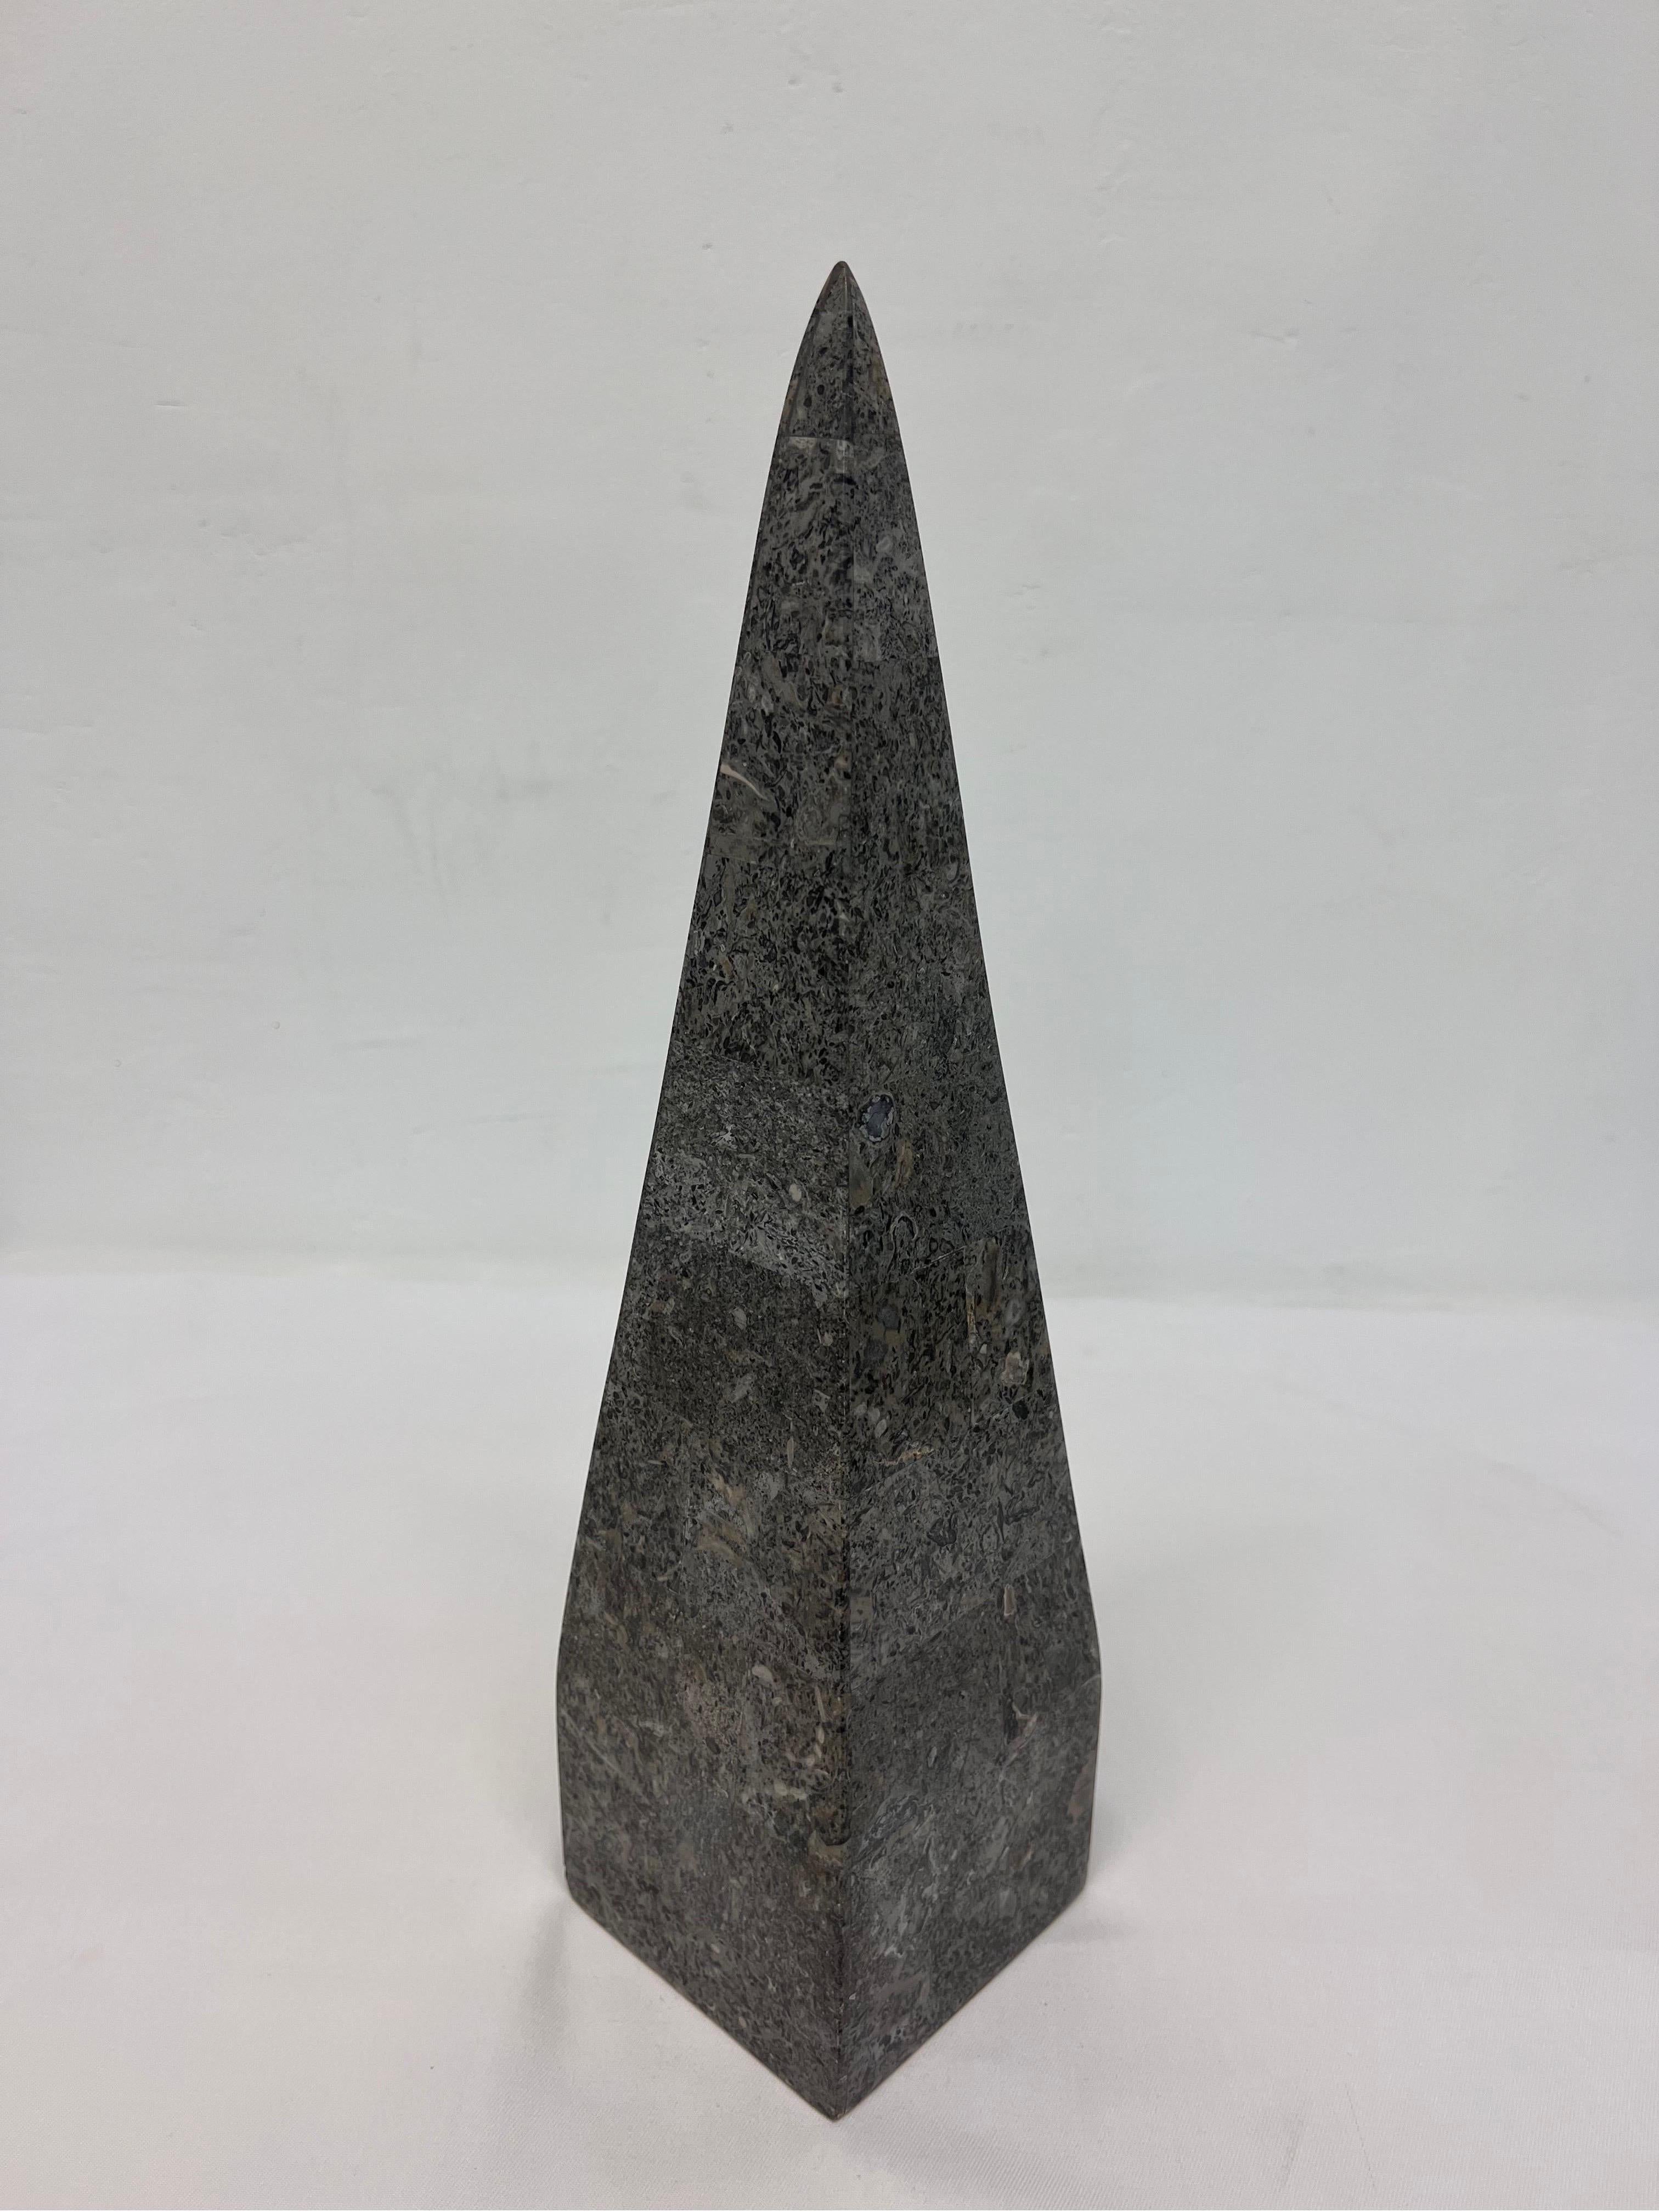 Tessellated Stone Obelisk For Sale 3